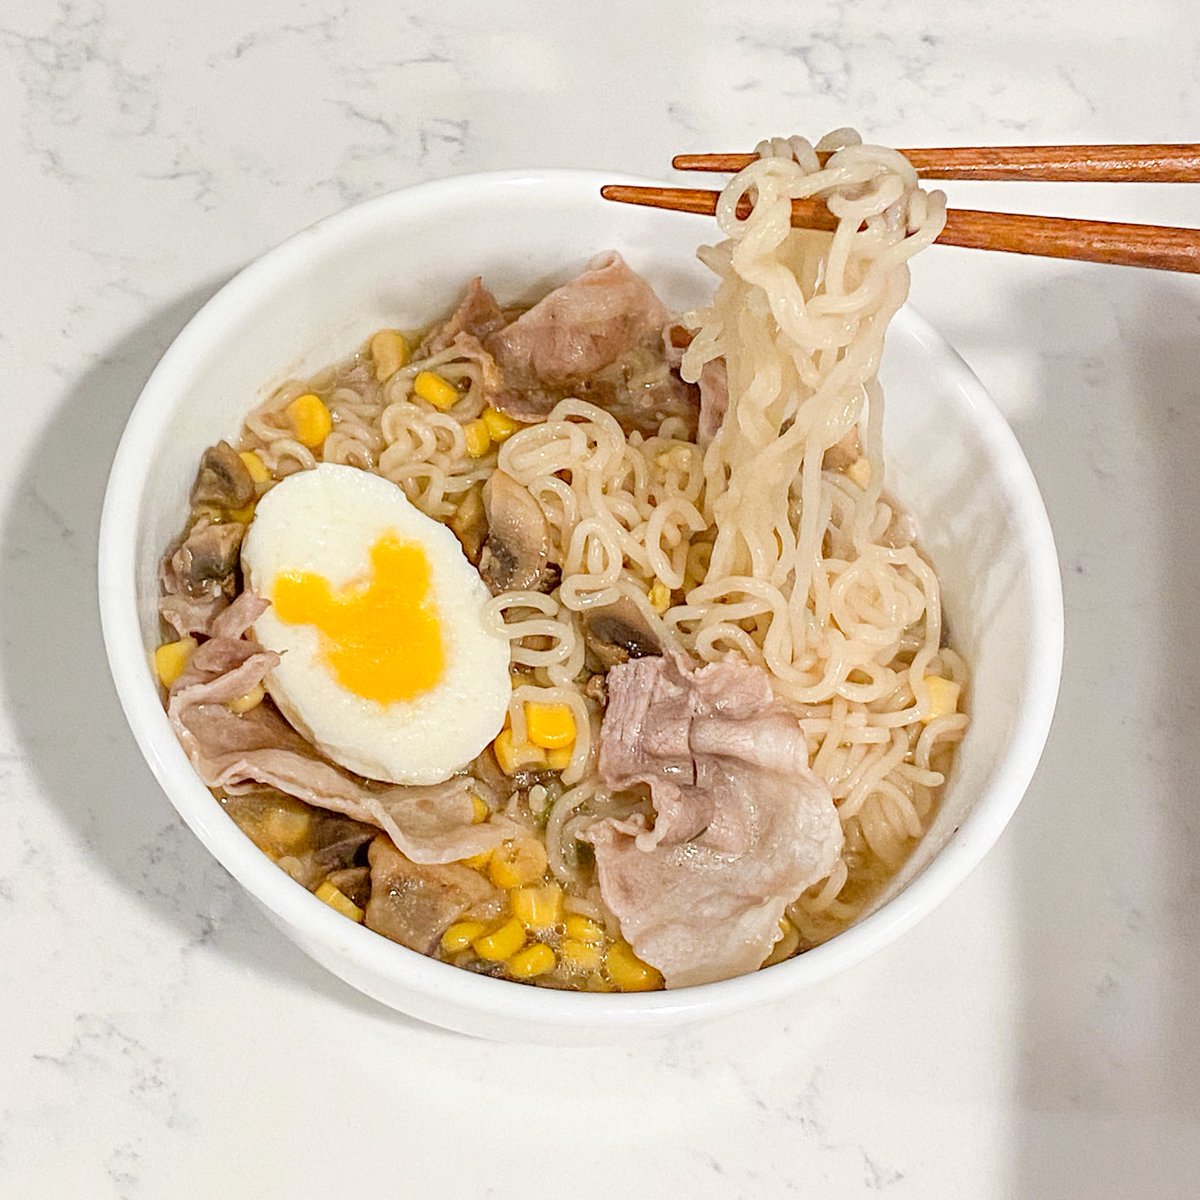 Last night’s DQFF is the best yet! The follow up to this tweet is a tutorial on how to make the egg Tonkotsu ramen with pork shabu, corn, mushrooms, and Mickey Mouse egg 